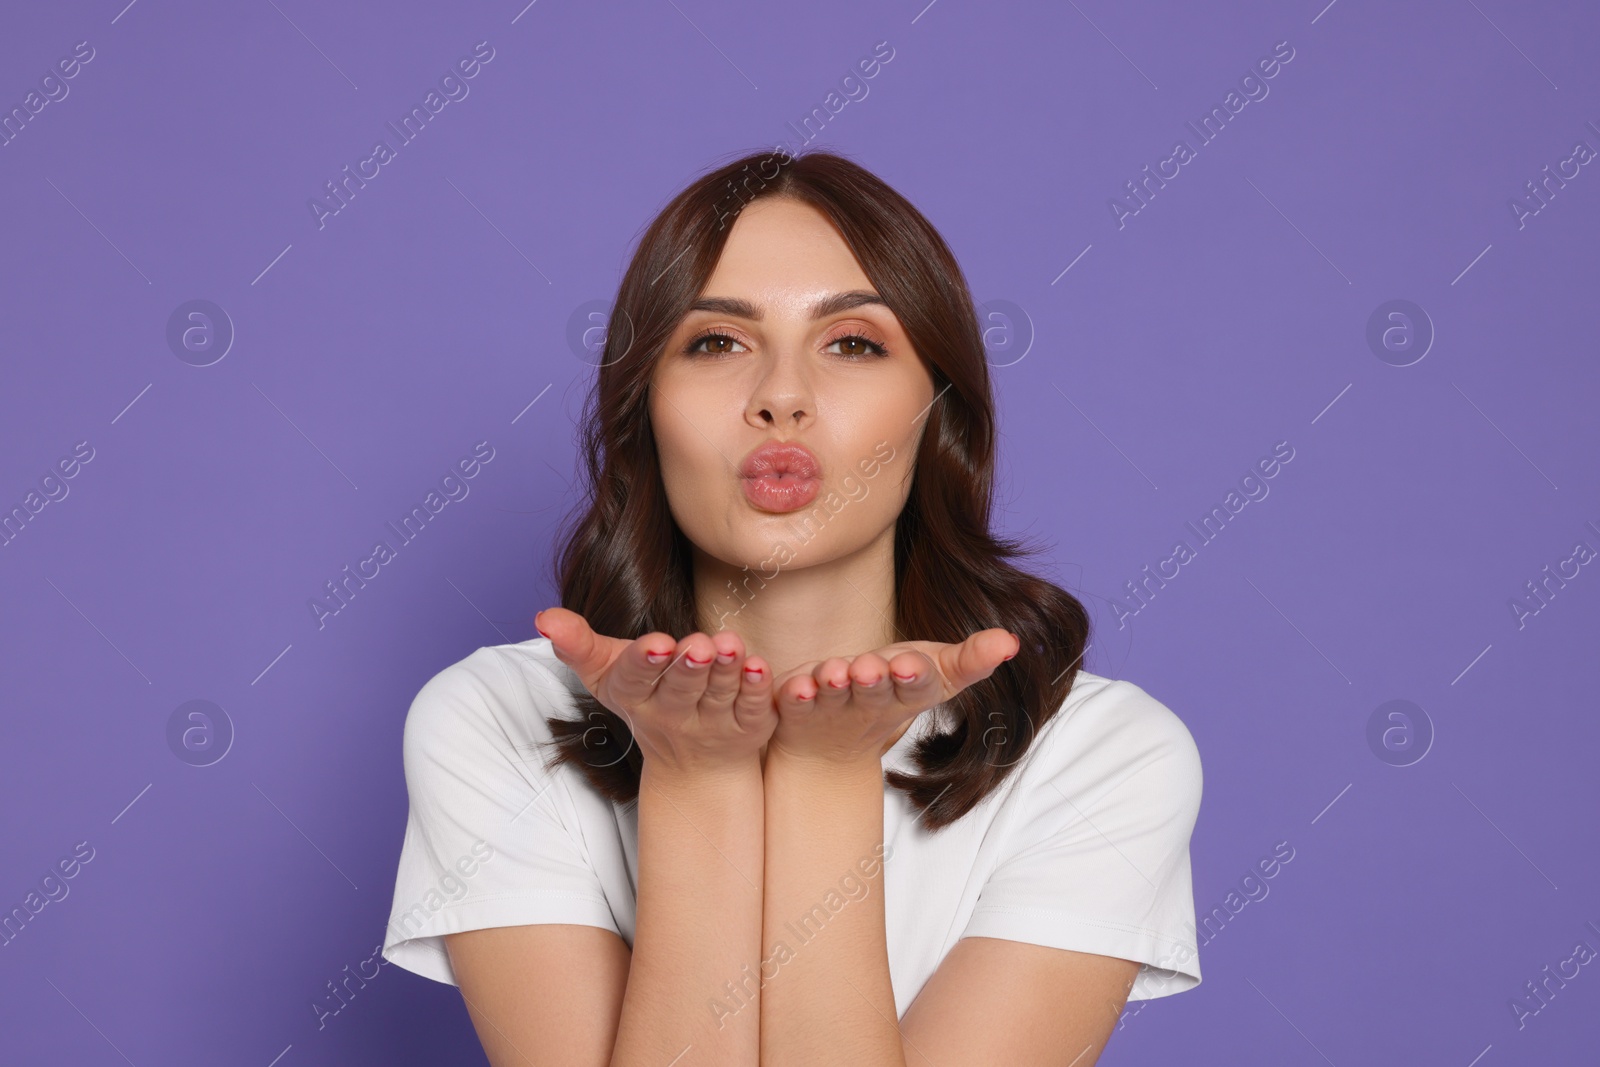 Photo of Beautiful young woman blowing kiss on purple background